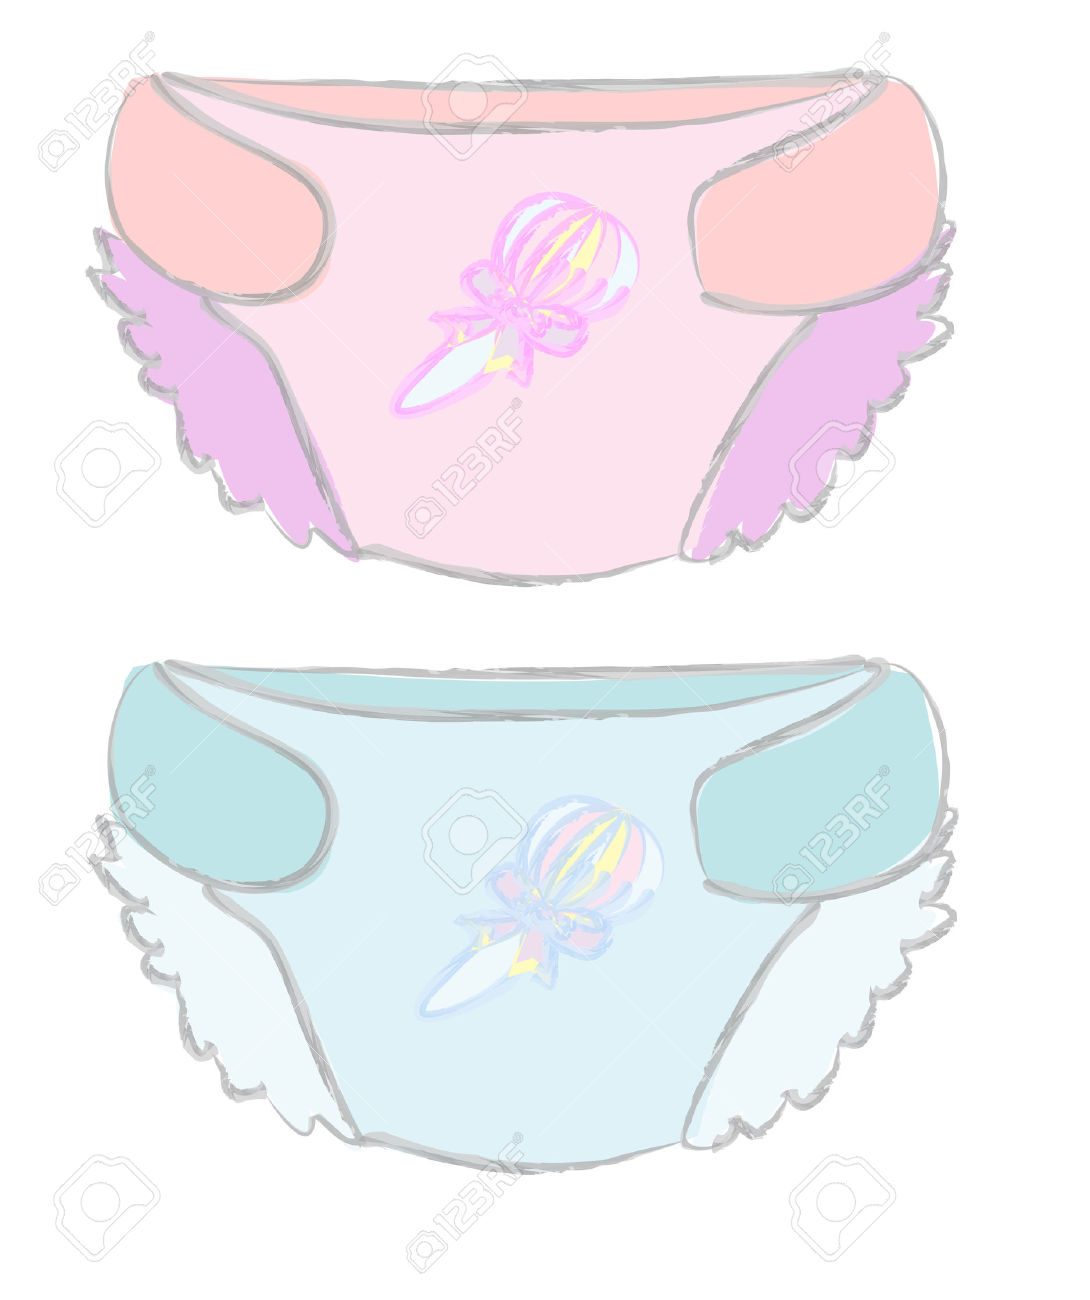 free clipart of baby in diaper - photo #31